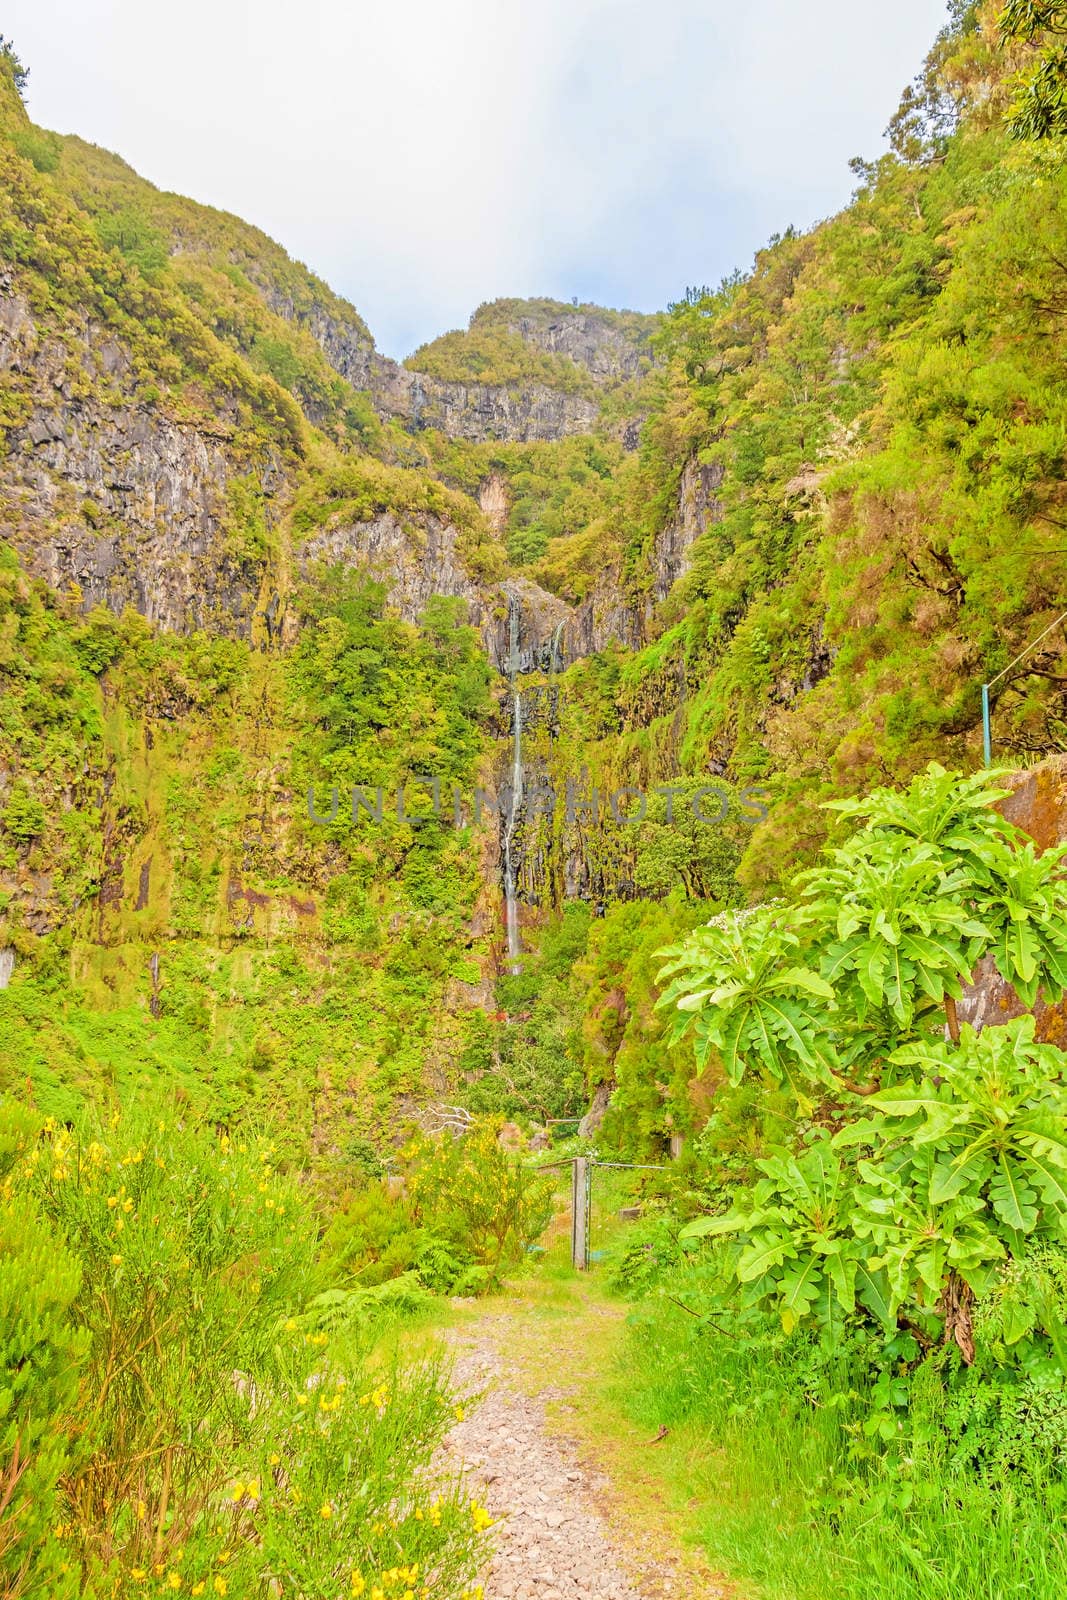 View of 25 fontes falls (25 fountains waterfalls) and greenish forest landscape on Madeira, the hiking and flower island